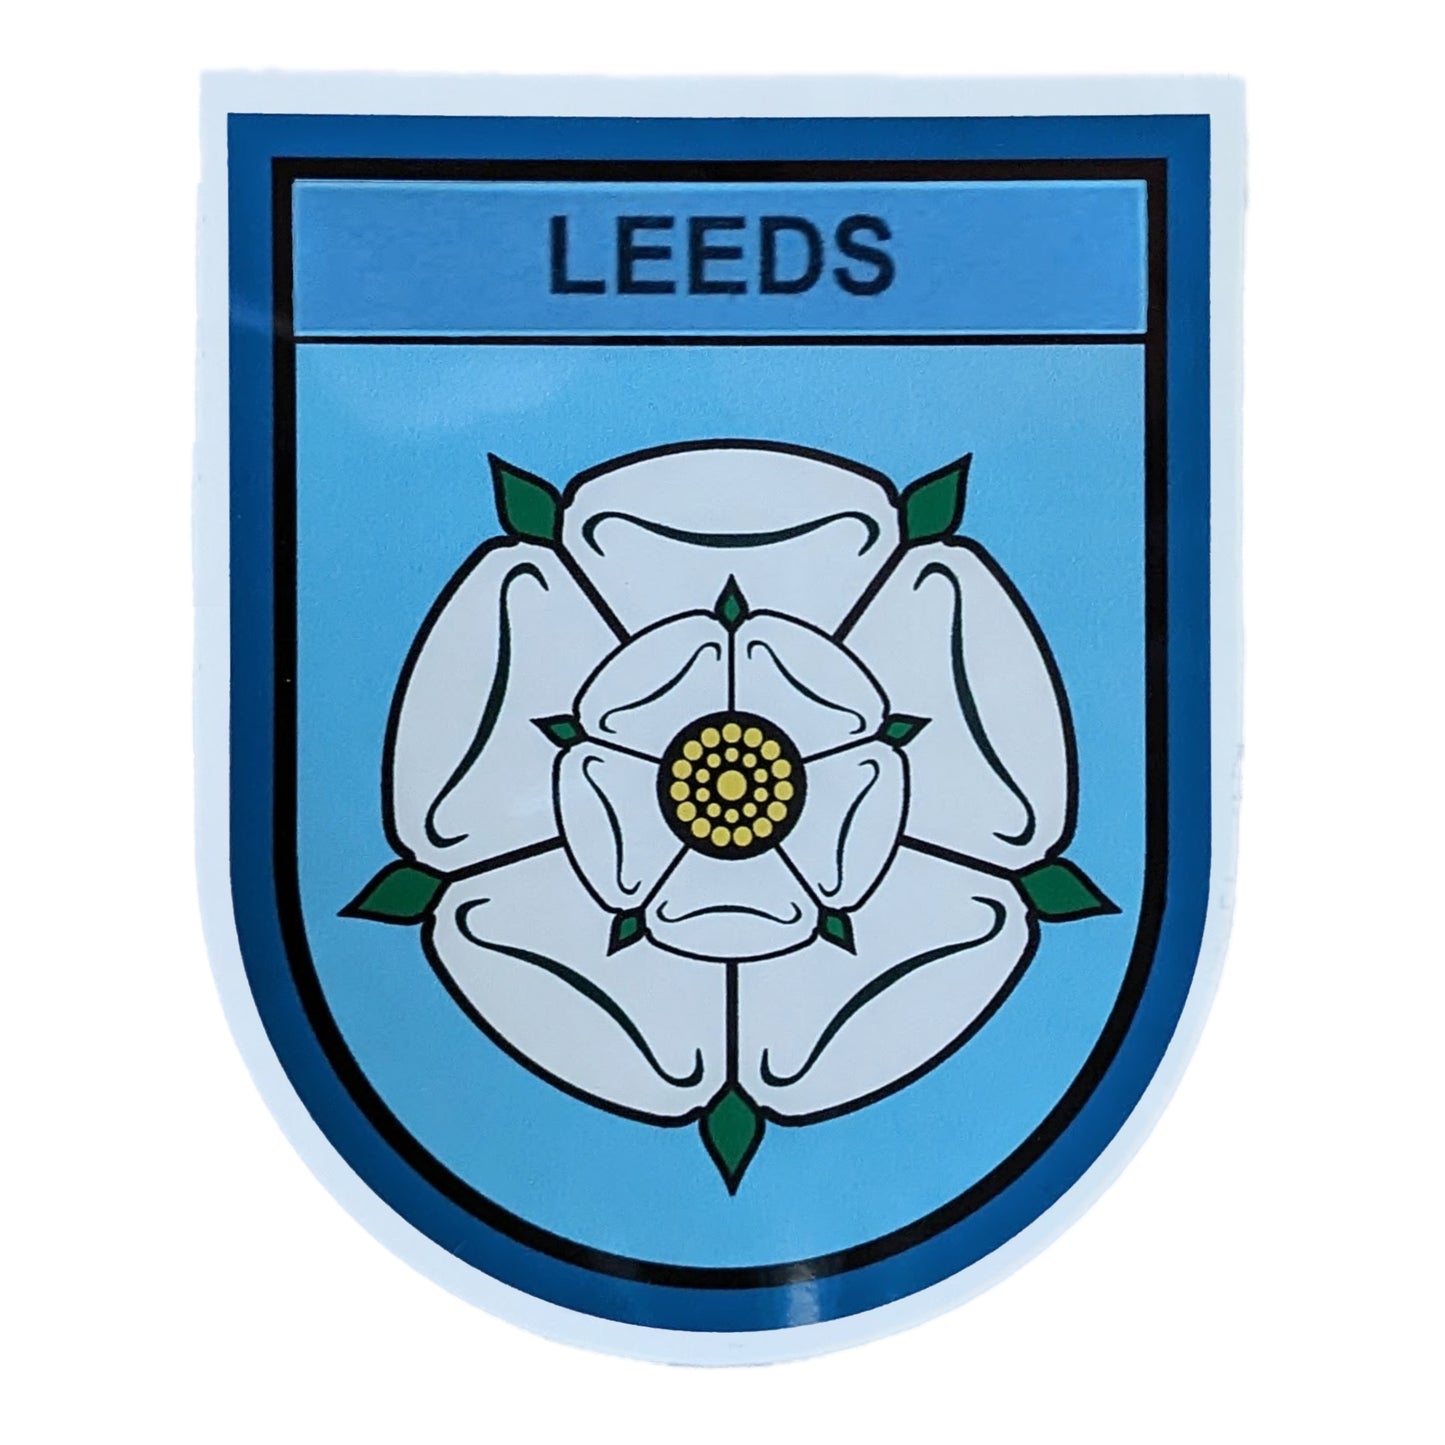 Leeds White Rose Sticker - The Great Yorkshire Shop